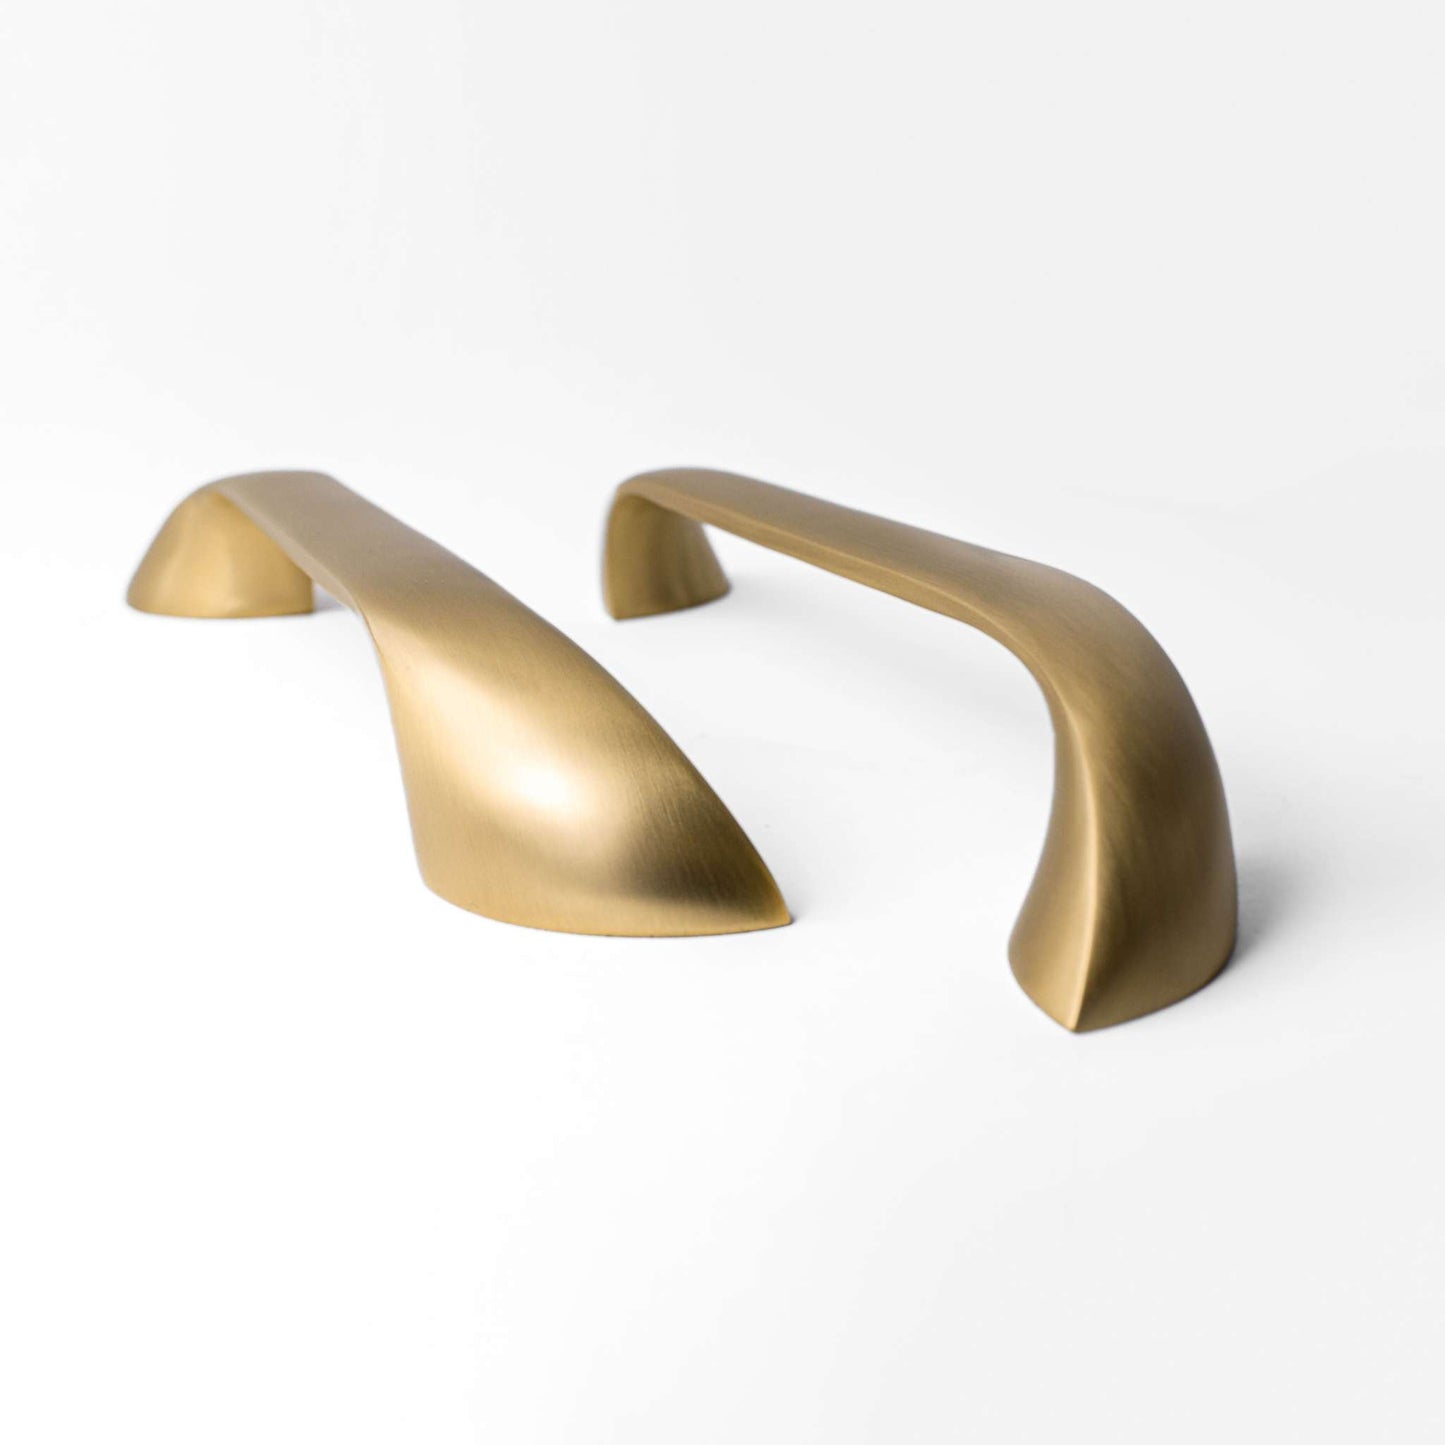 Twist, Solid Brass Appliance Pulls


Meet our new line of Verge Edge Pulls.  Similar in weight and feel to our Grip Edge pull, but now available at more accessible price. The solid and heavy brass coappliance pullTwist, Solid Brass Appliance Pulls